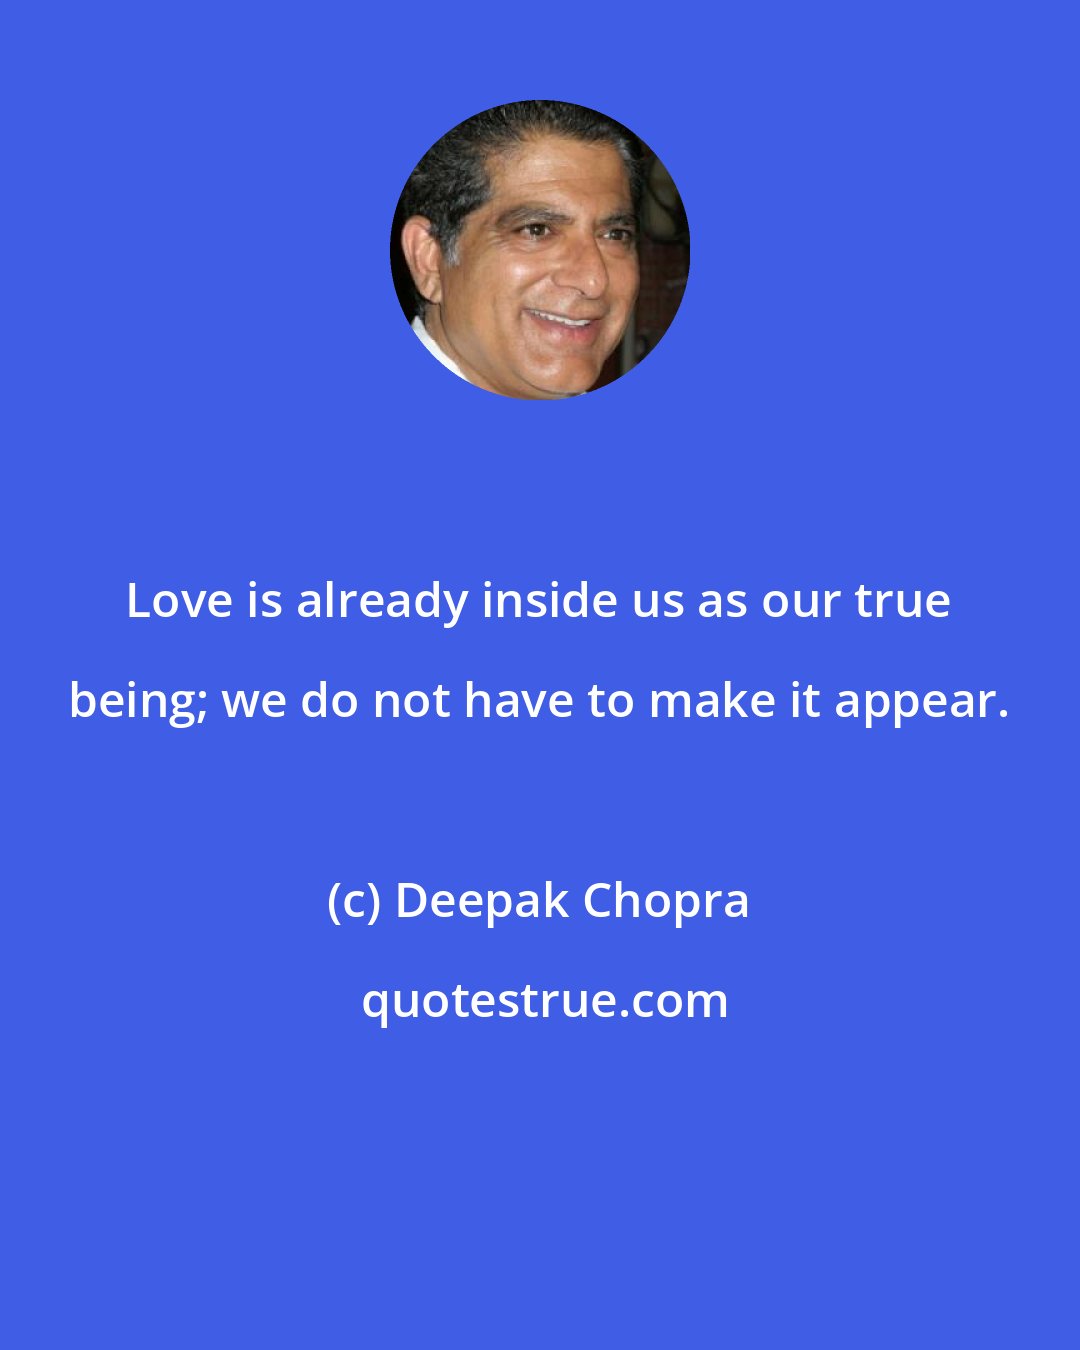 Deepak Chopra: Love is already inside us as our true being; we do not have to make it appear.